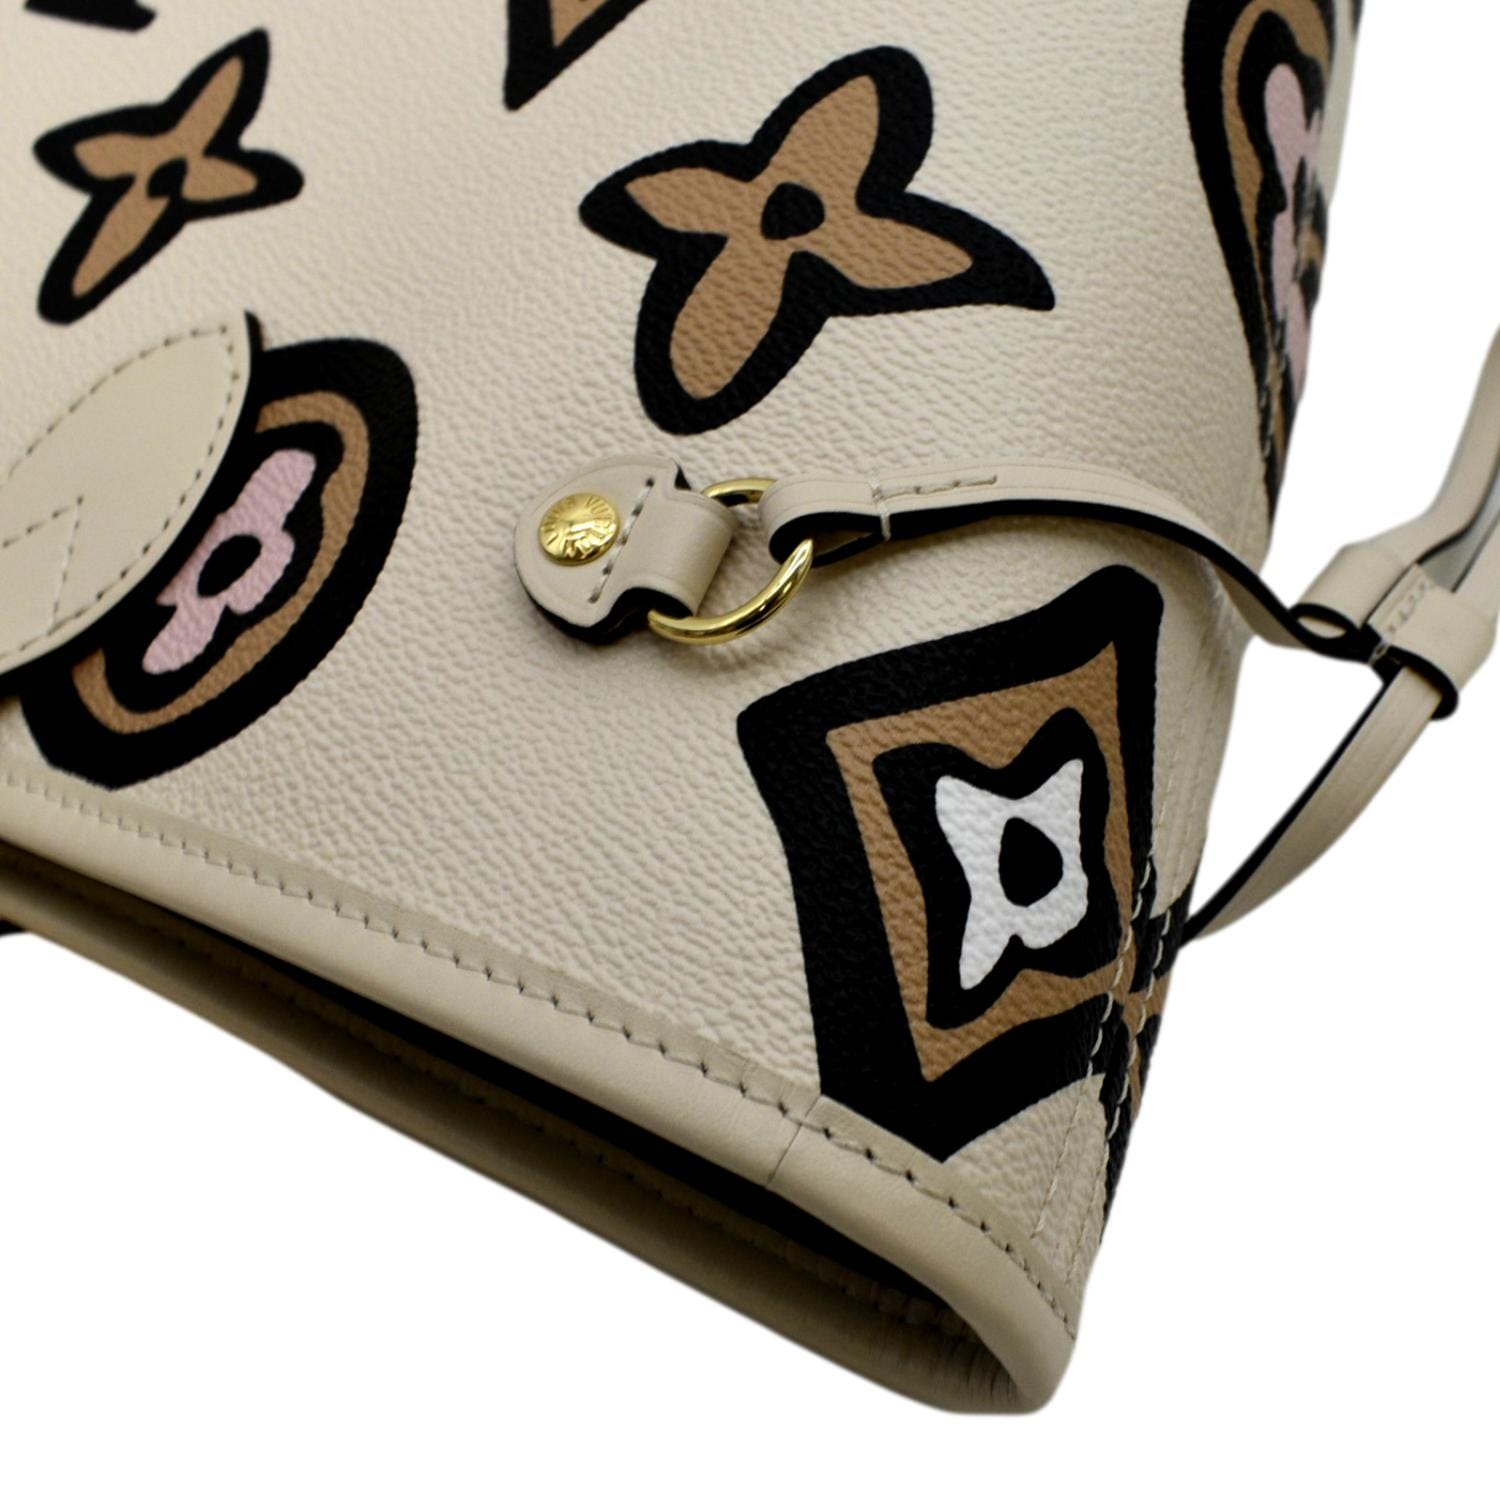 LOUIS VUITTON WILD AT HEART NEVERFULL MM CREME GIANT MONOGRAM BAG **No  Pouch**